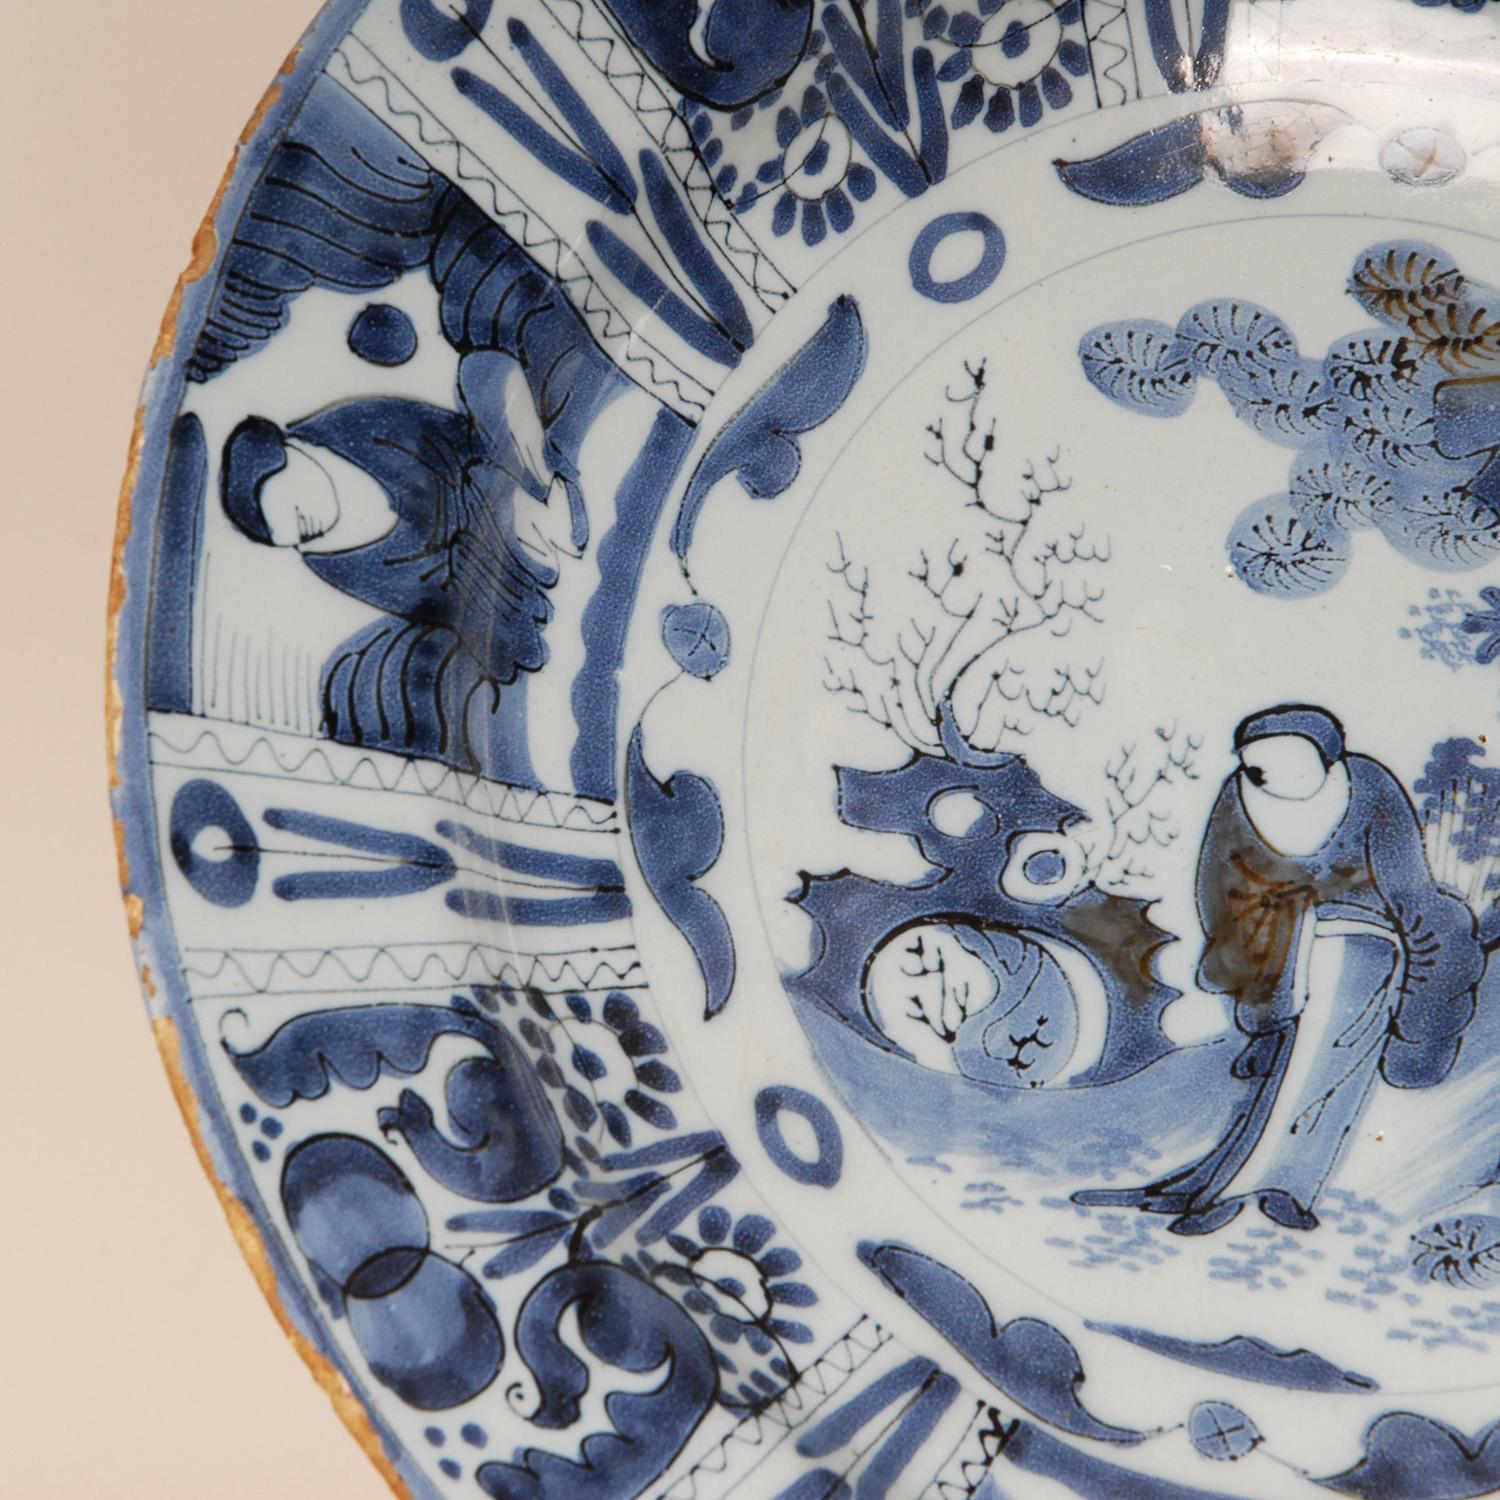 Large 17th Century Delft dish Chinoiserie blue and white Delftware Charger
Material: Delft, earthenware, pottery.
Design: Ming Dynasty, Wanli style, Chinoiserie
Style: Ming, William and Mary - Louis XIV Baroque, Antique, Asian antique,